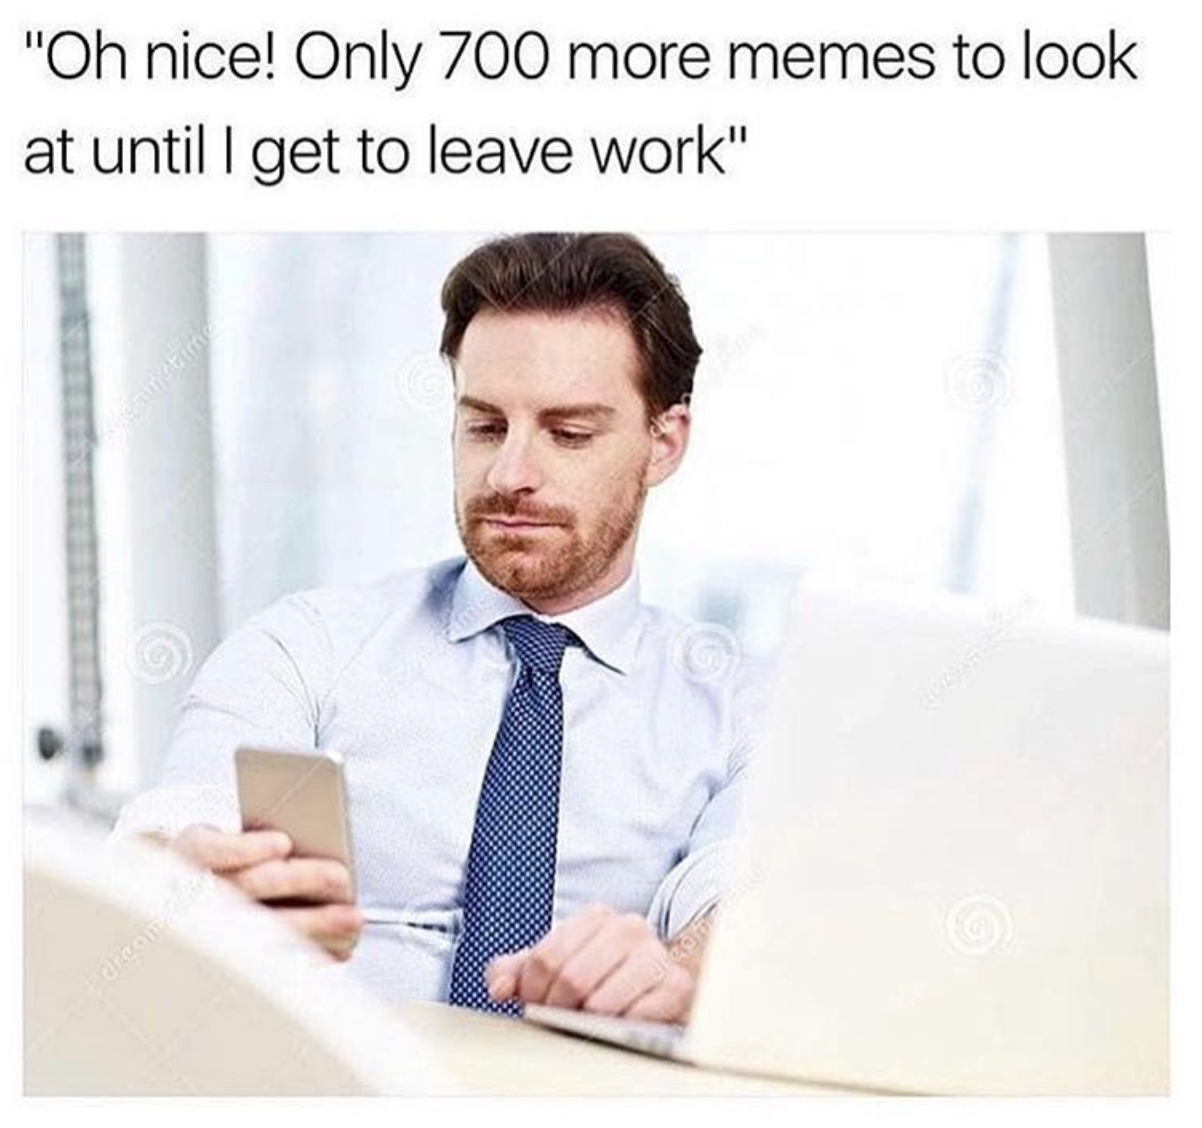 cool pics and memes - Meme - "Oh nice! Only 700 more memes to look at until I get to leave work" septe